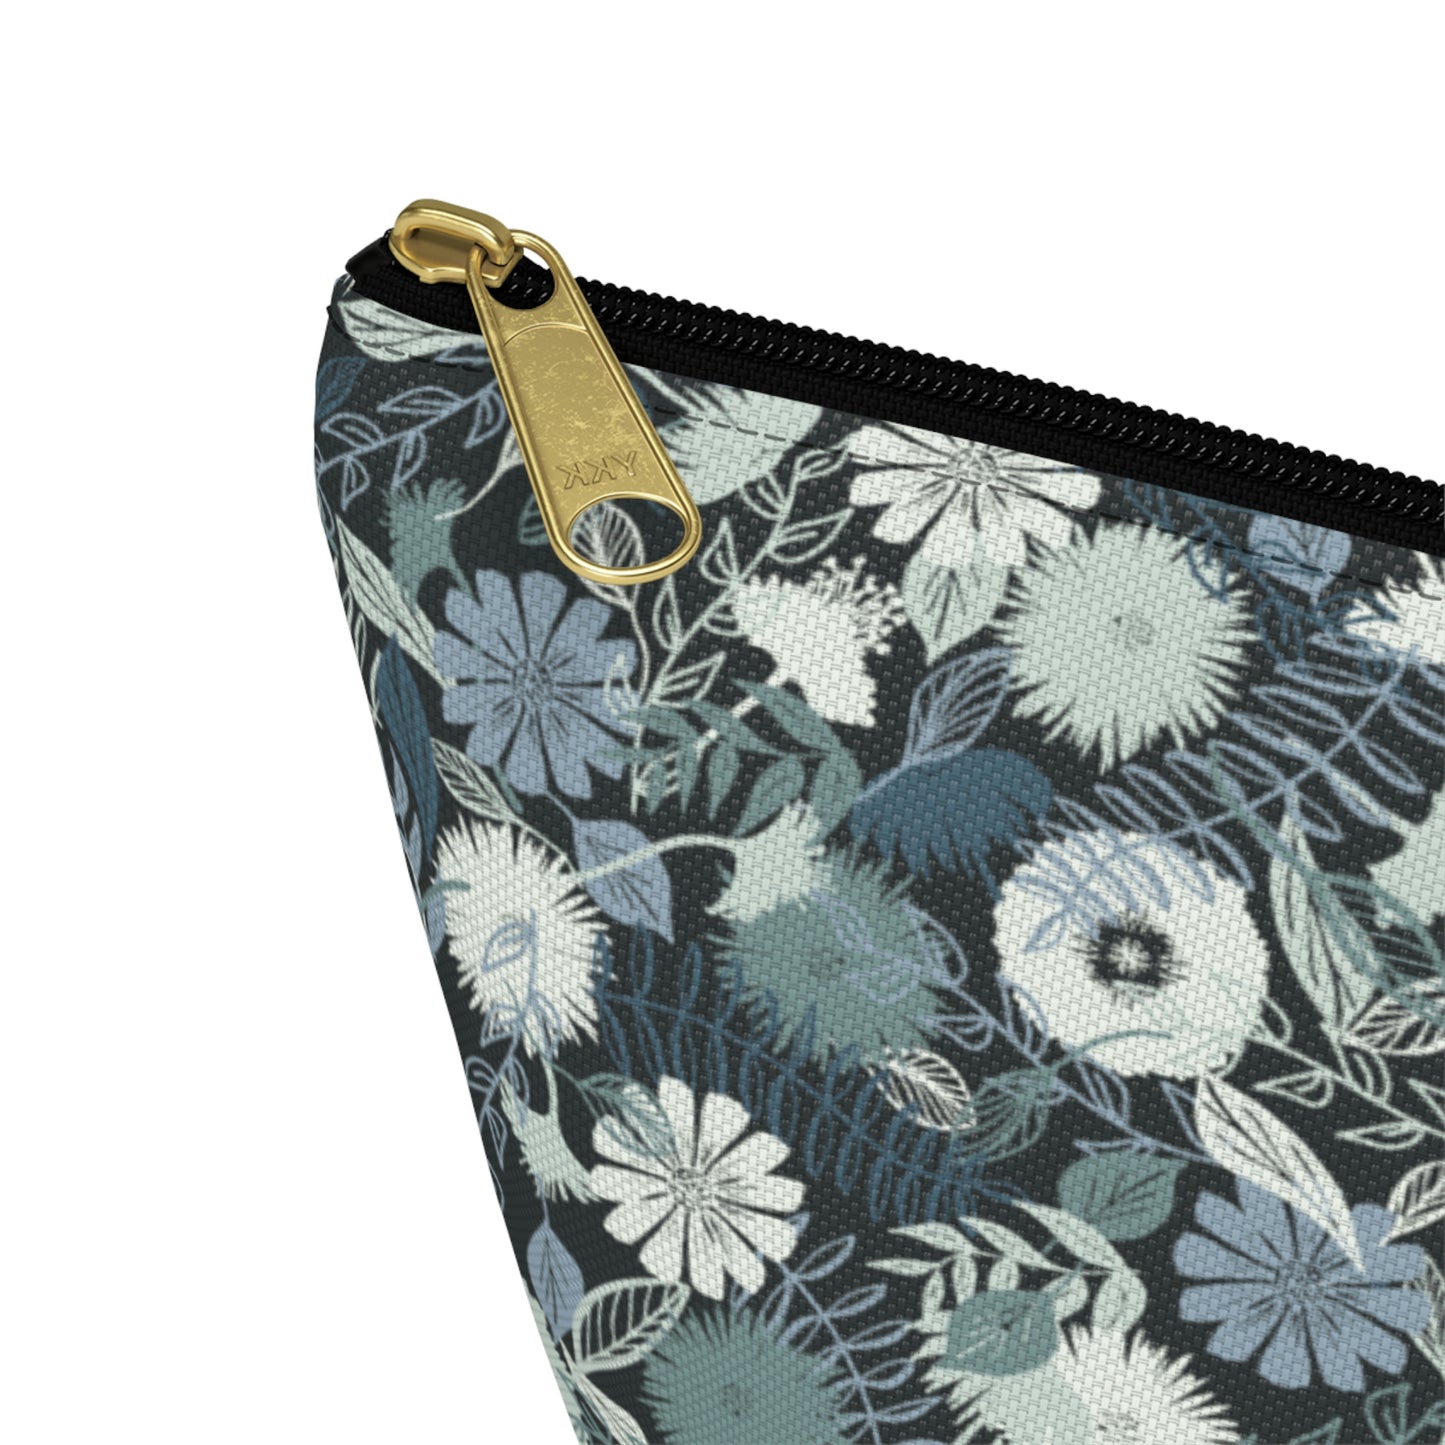 Accessory Pouch in Floral Cover Dark